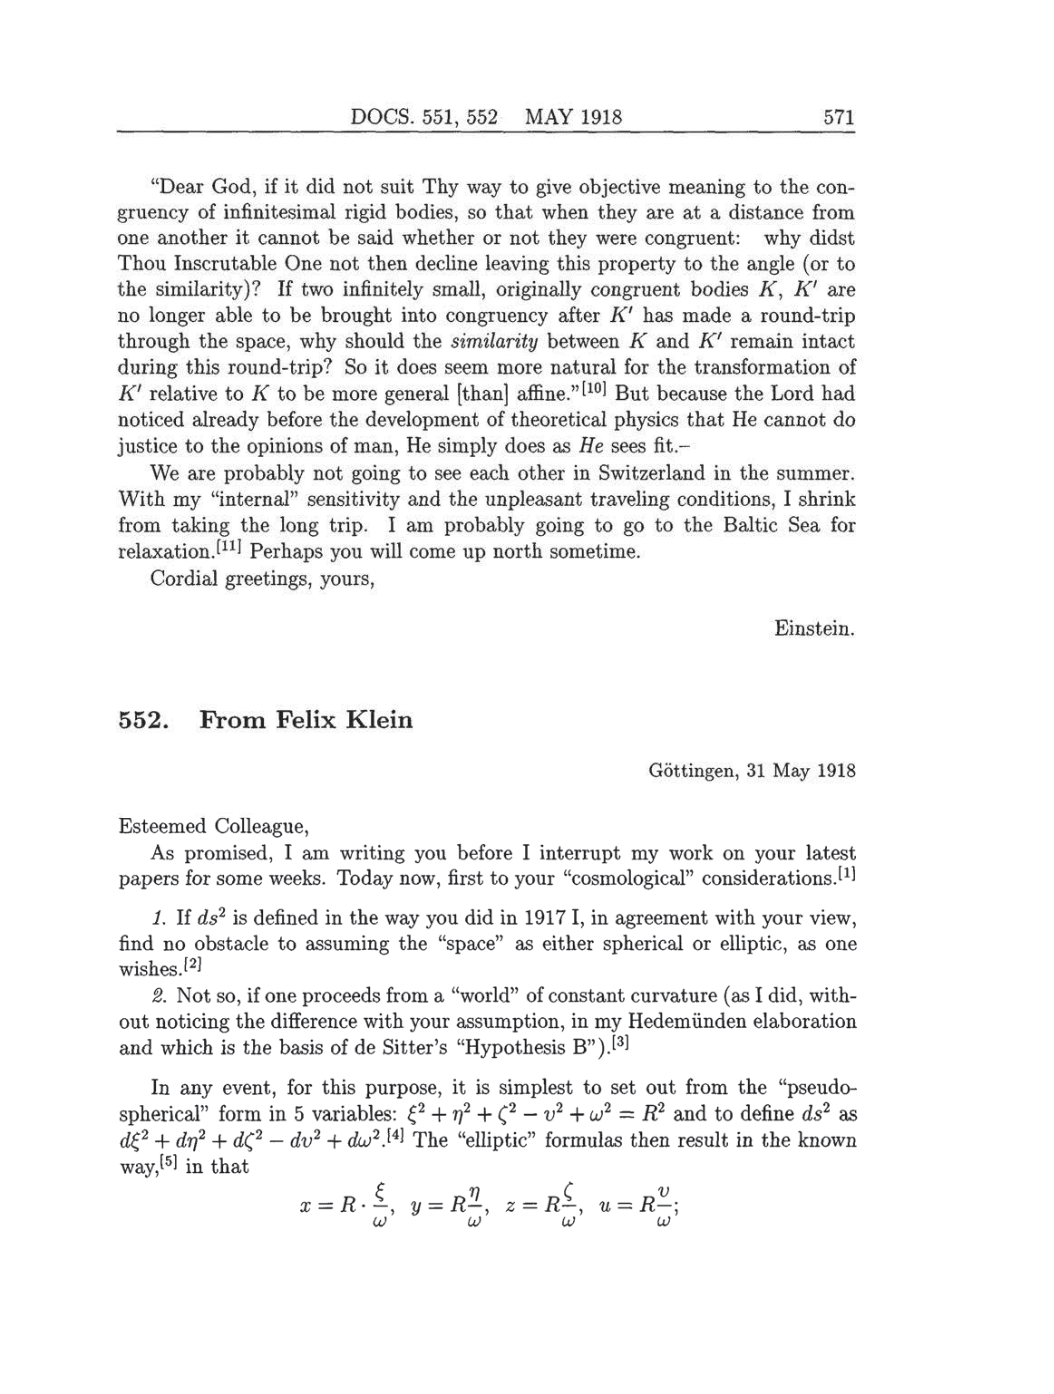 Volume 8: The Berlin Years: Correspondence, 1914-1918 (English translation supplement) page 571